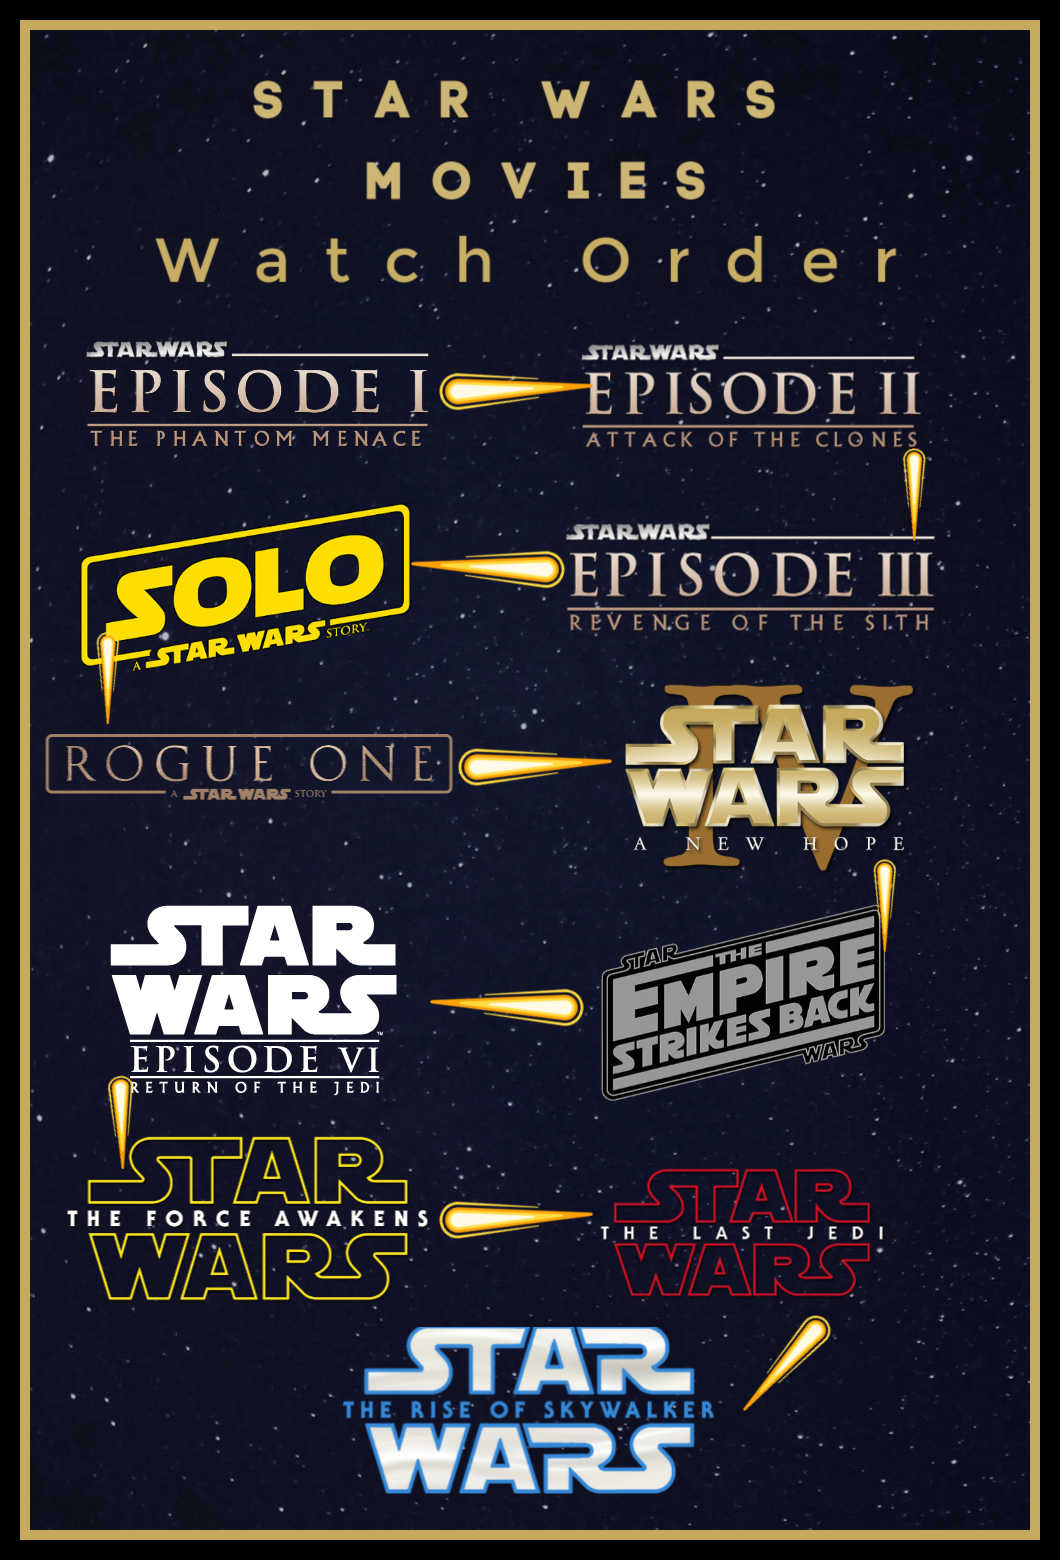 The Star Wars Films In Order, which order should I watch the Star Wars Movies?